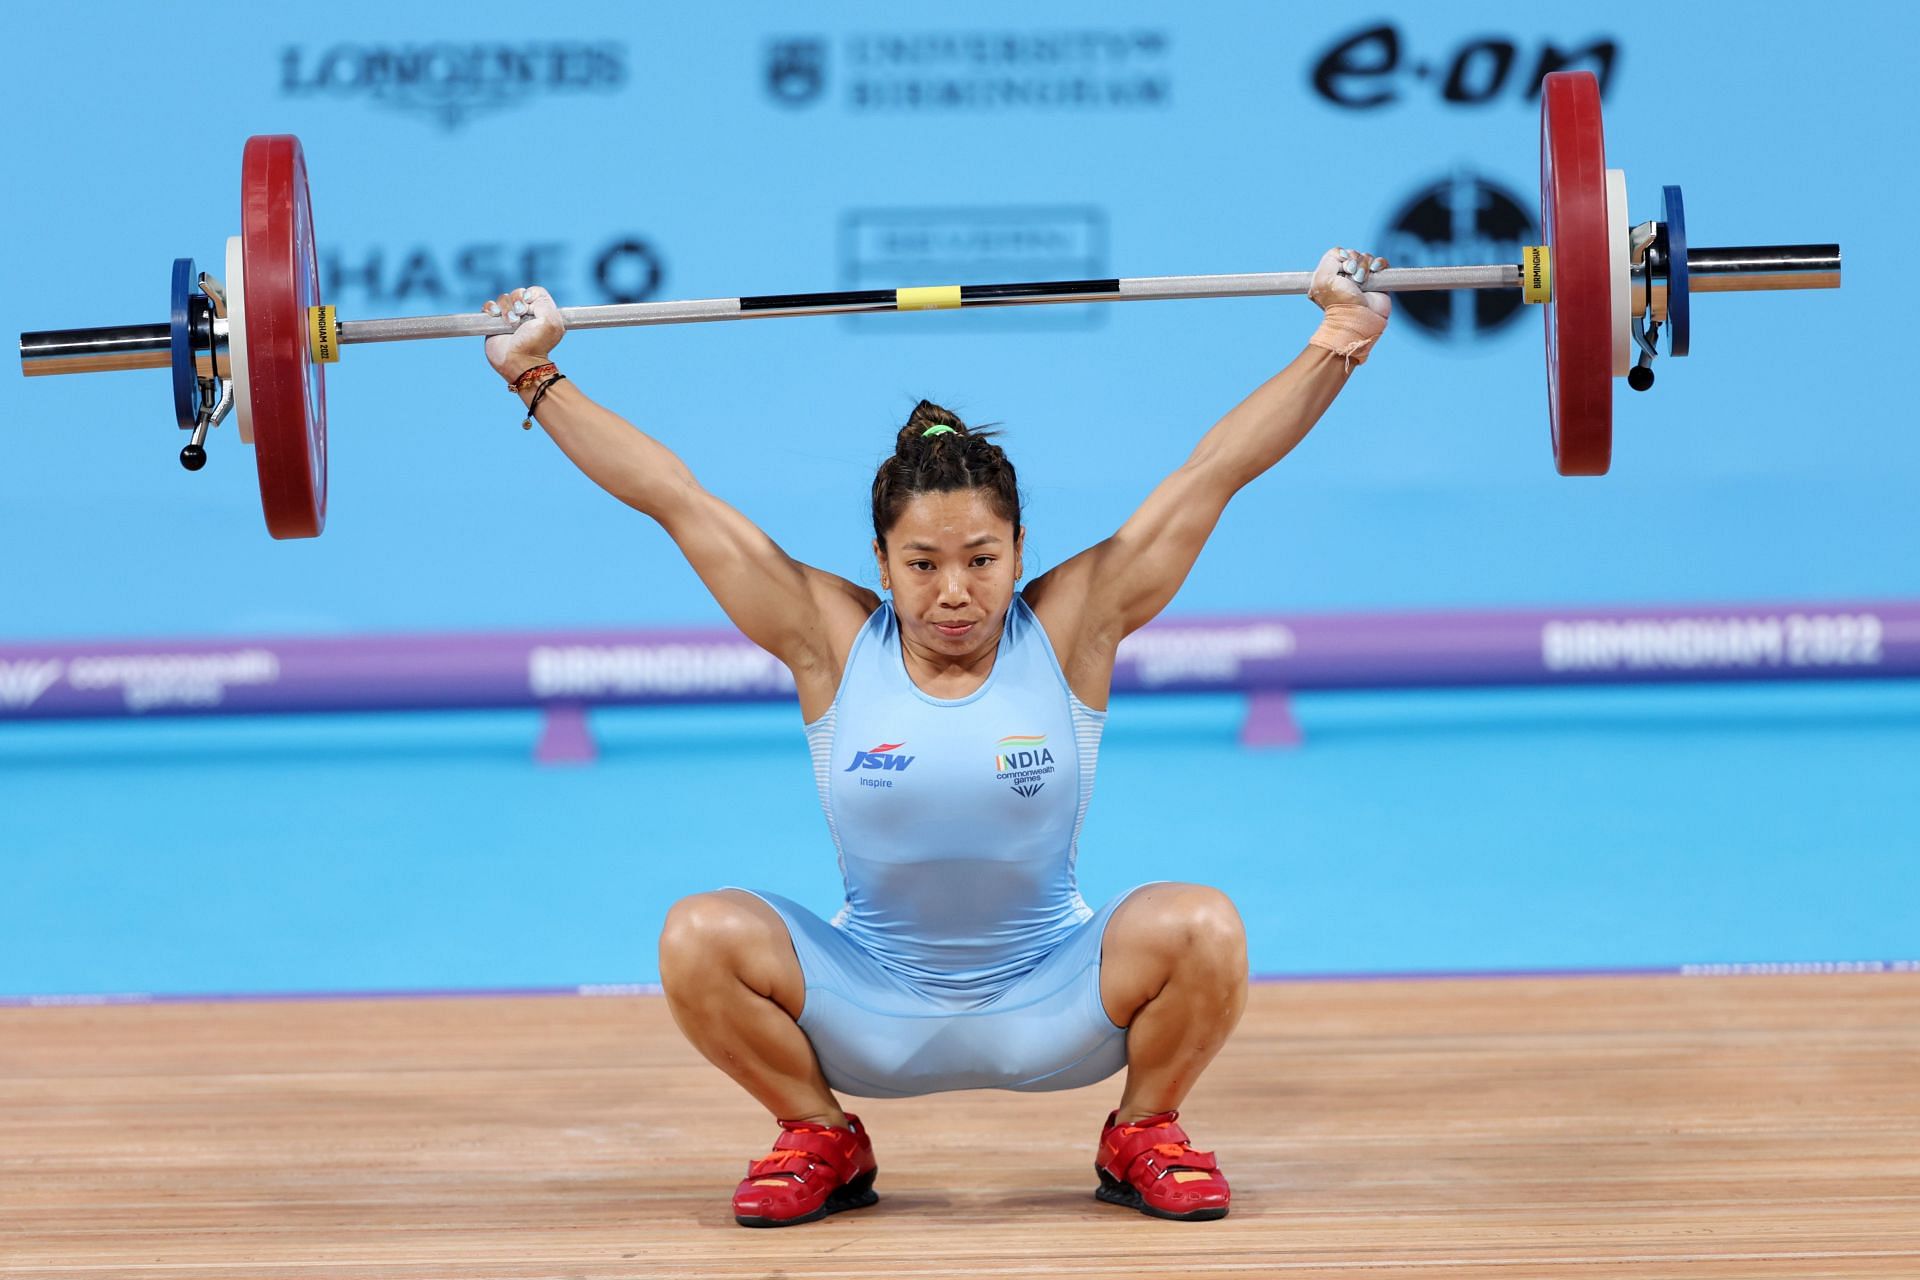 Mirabai Chanu became the first athlete to win a gold medal for India at Commonwealth Games 2022 (Image: Getty)